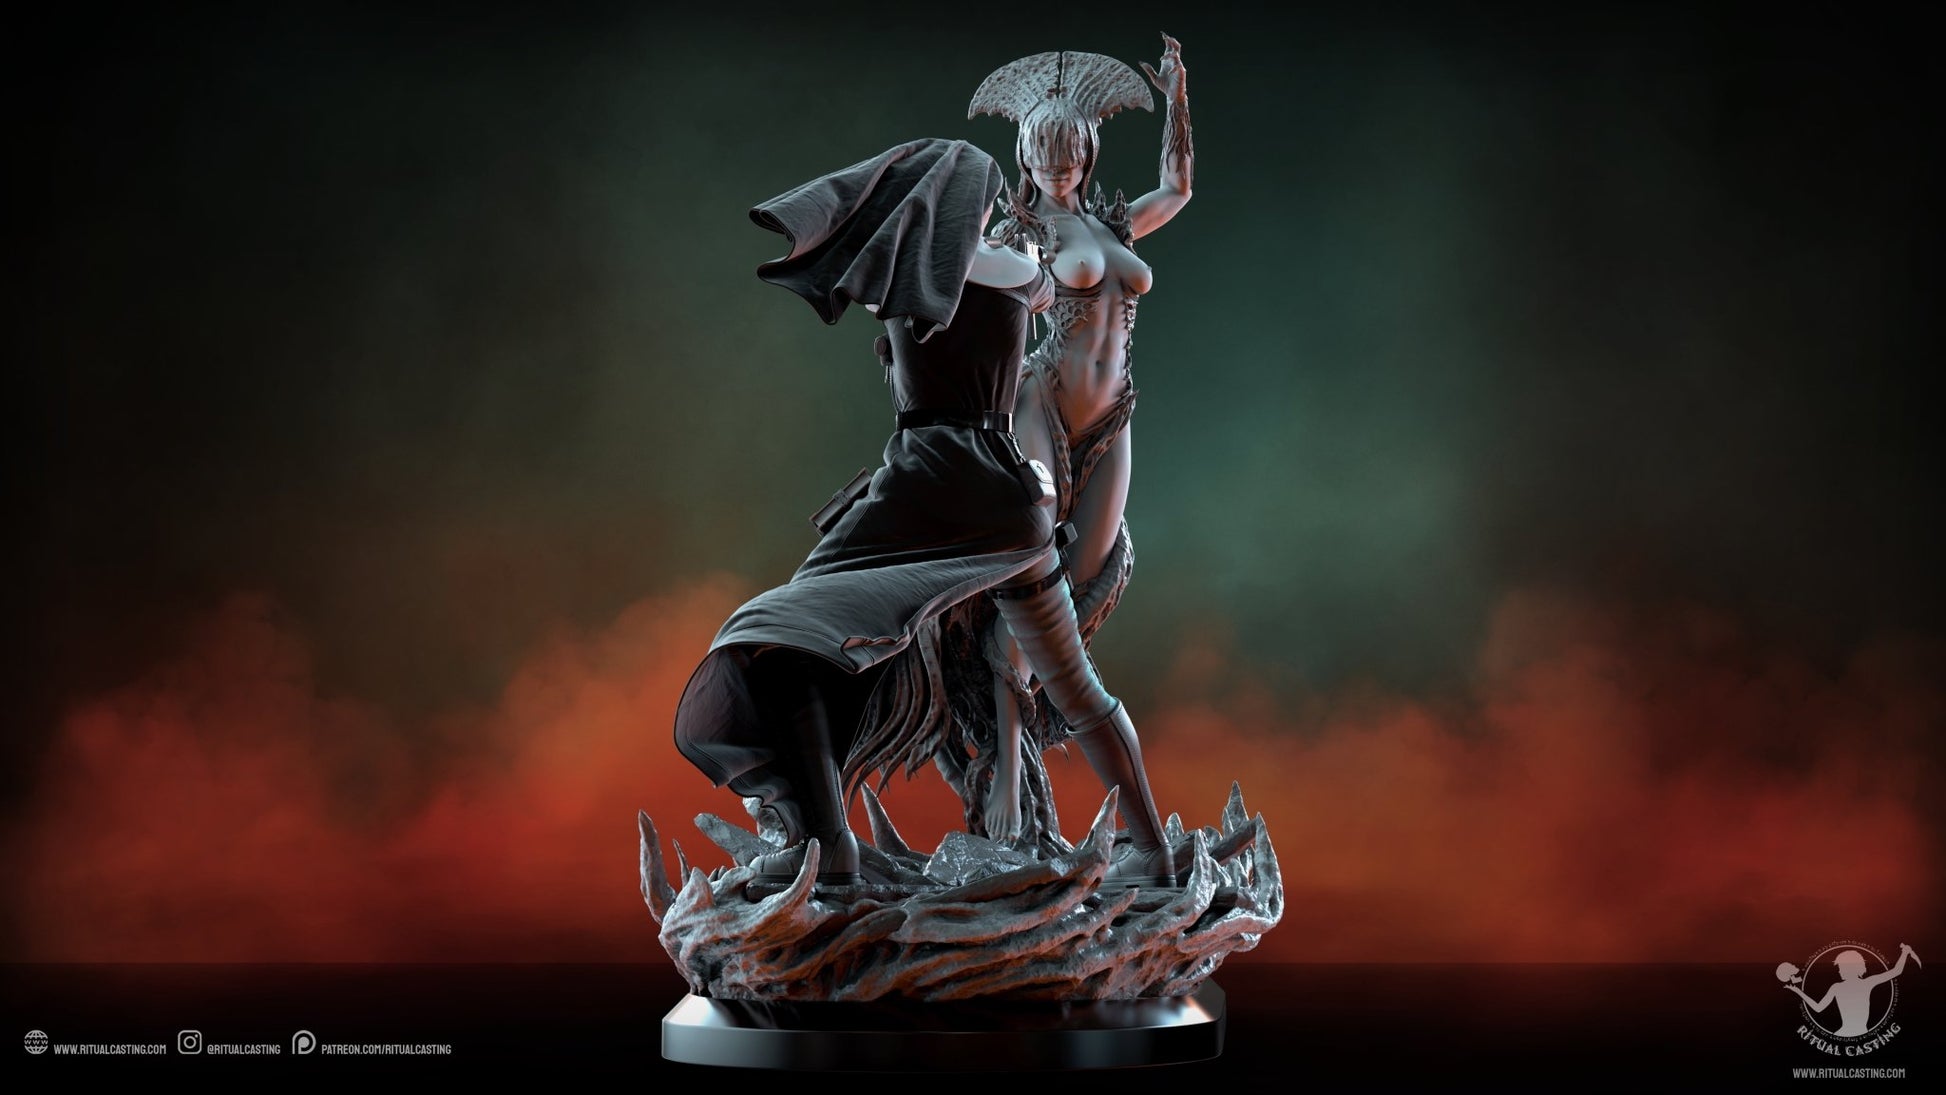 NSFW LADY SIN and SISTER MARY Diorama 3D Printed Miniature Fanart by Ritual Casting - Deus Spes Nostra diorama